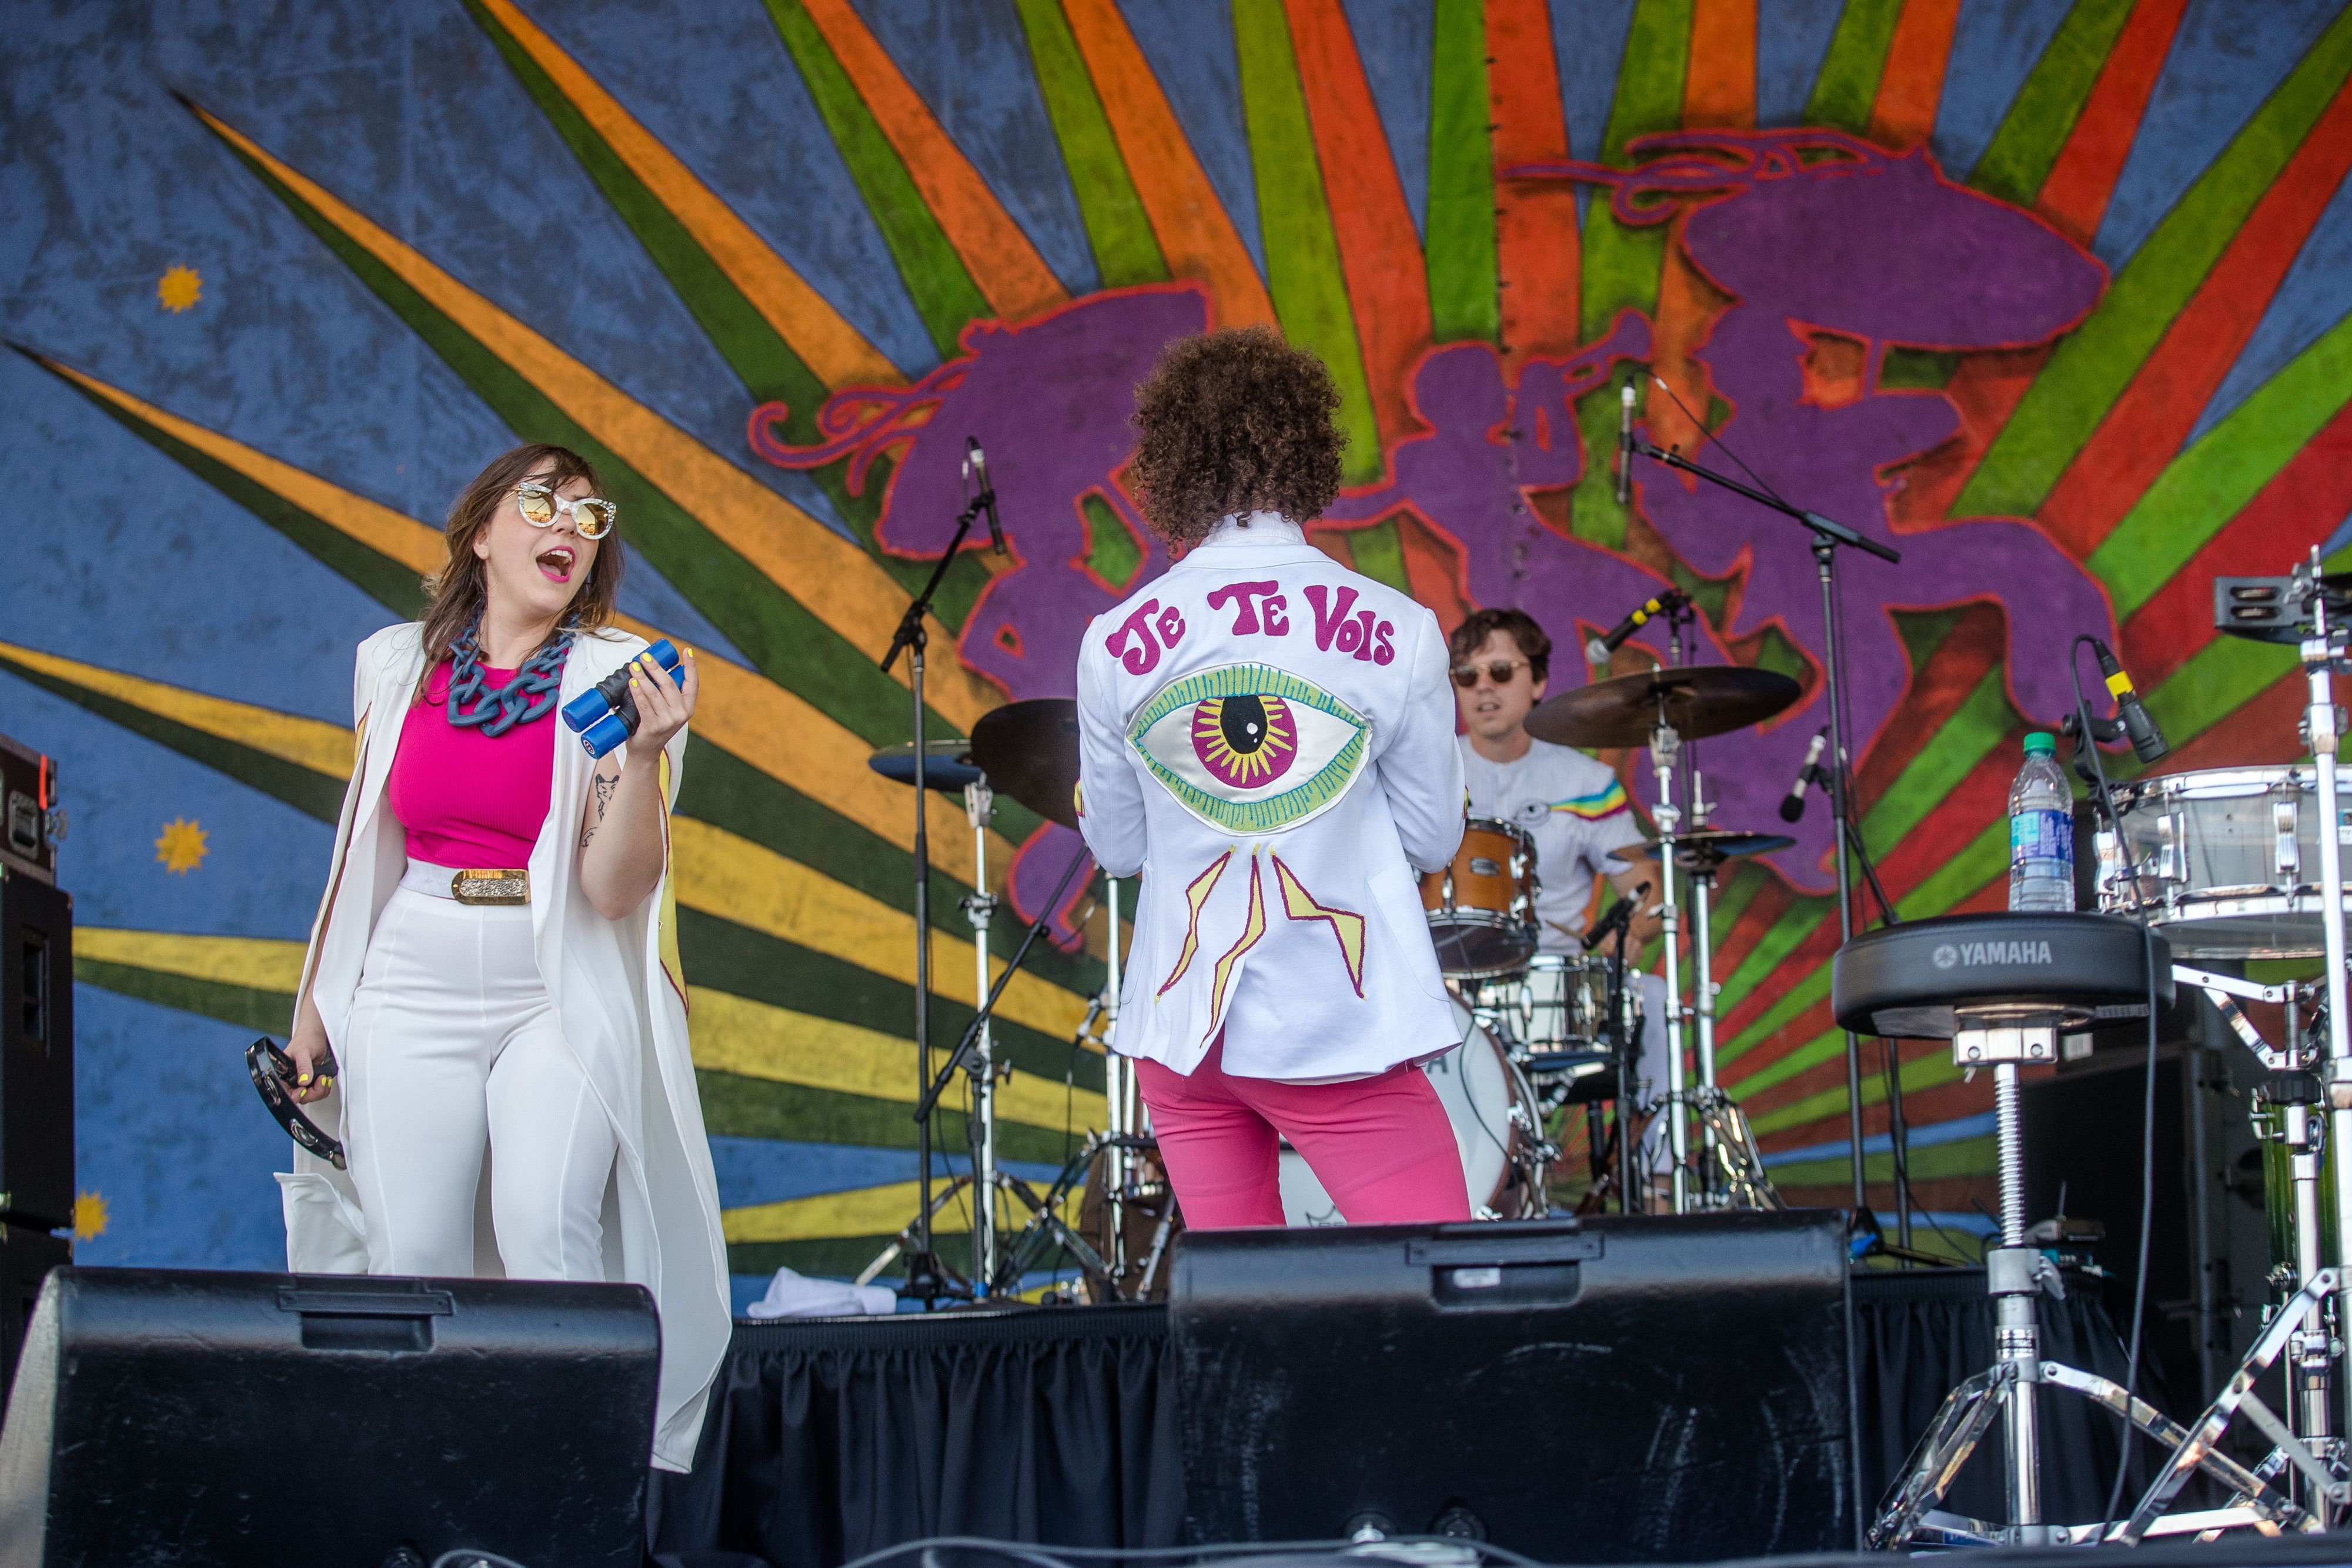 Sweet Crude performs on Jazz Fest's Gentilly Stage wearing customized white suits embroidered by Sigourney Morrison. Sam Craft stands at center stage with his back to the audience, showing an embroidered jacket that says "Je Te Vois" (or, "I see you") above a green and pink eyeball and lightning bolts.